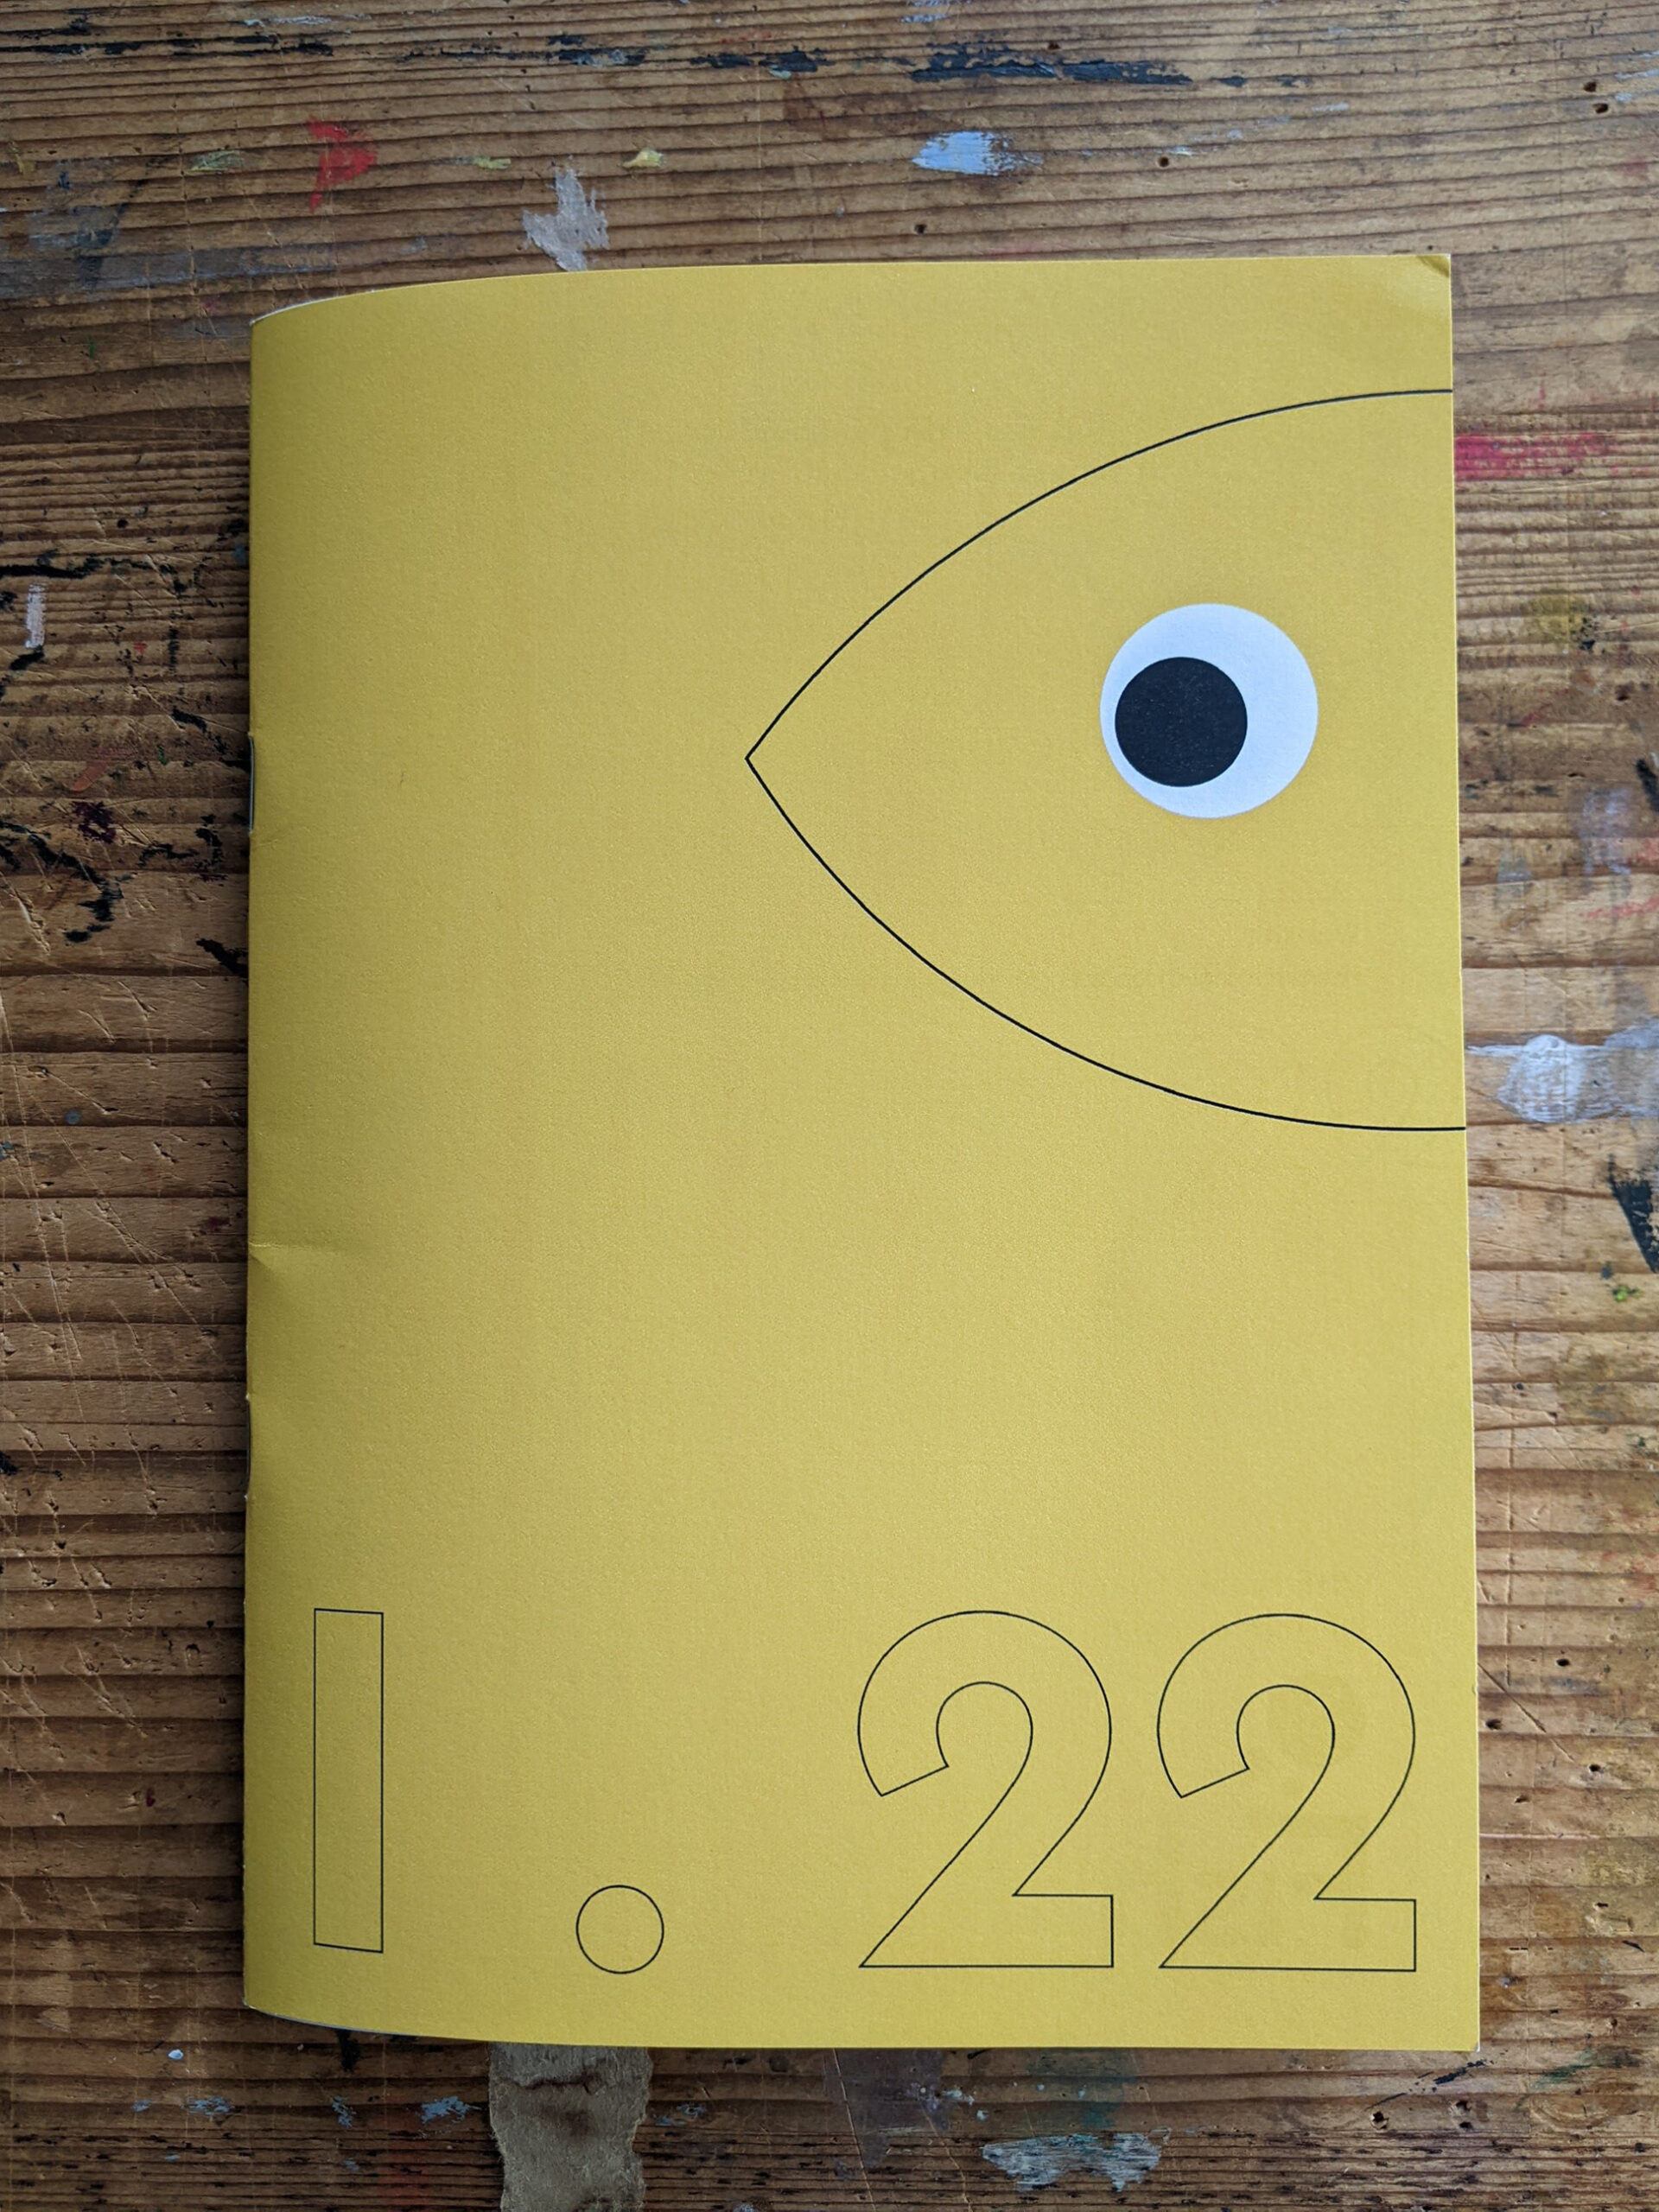 An Image of a yellow booklet with a picture of fish and the numbers 1 and 22